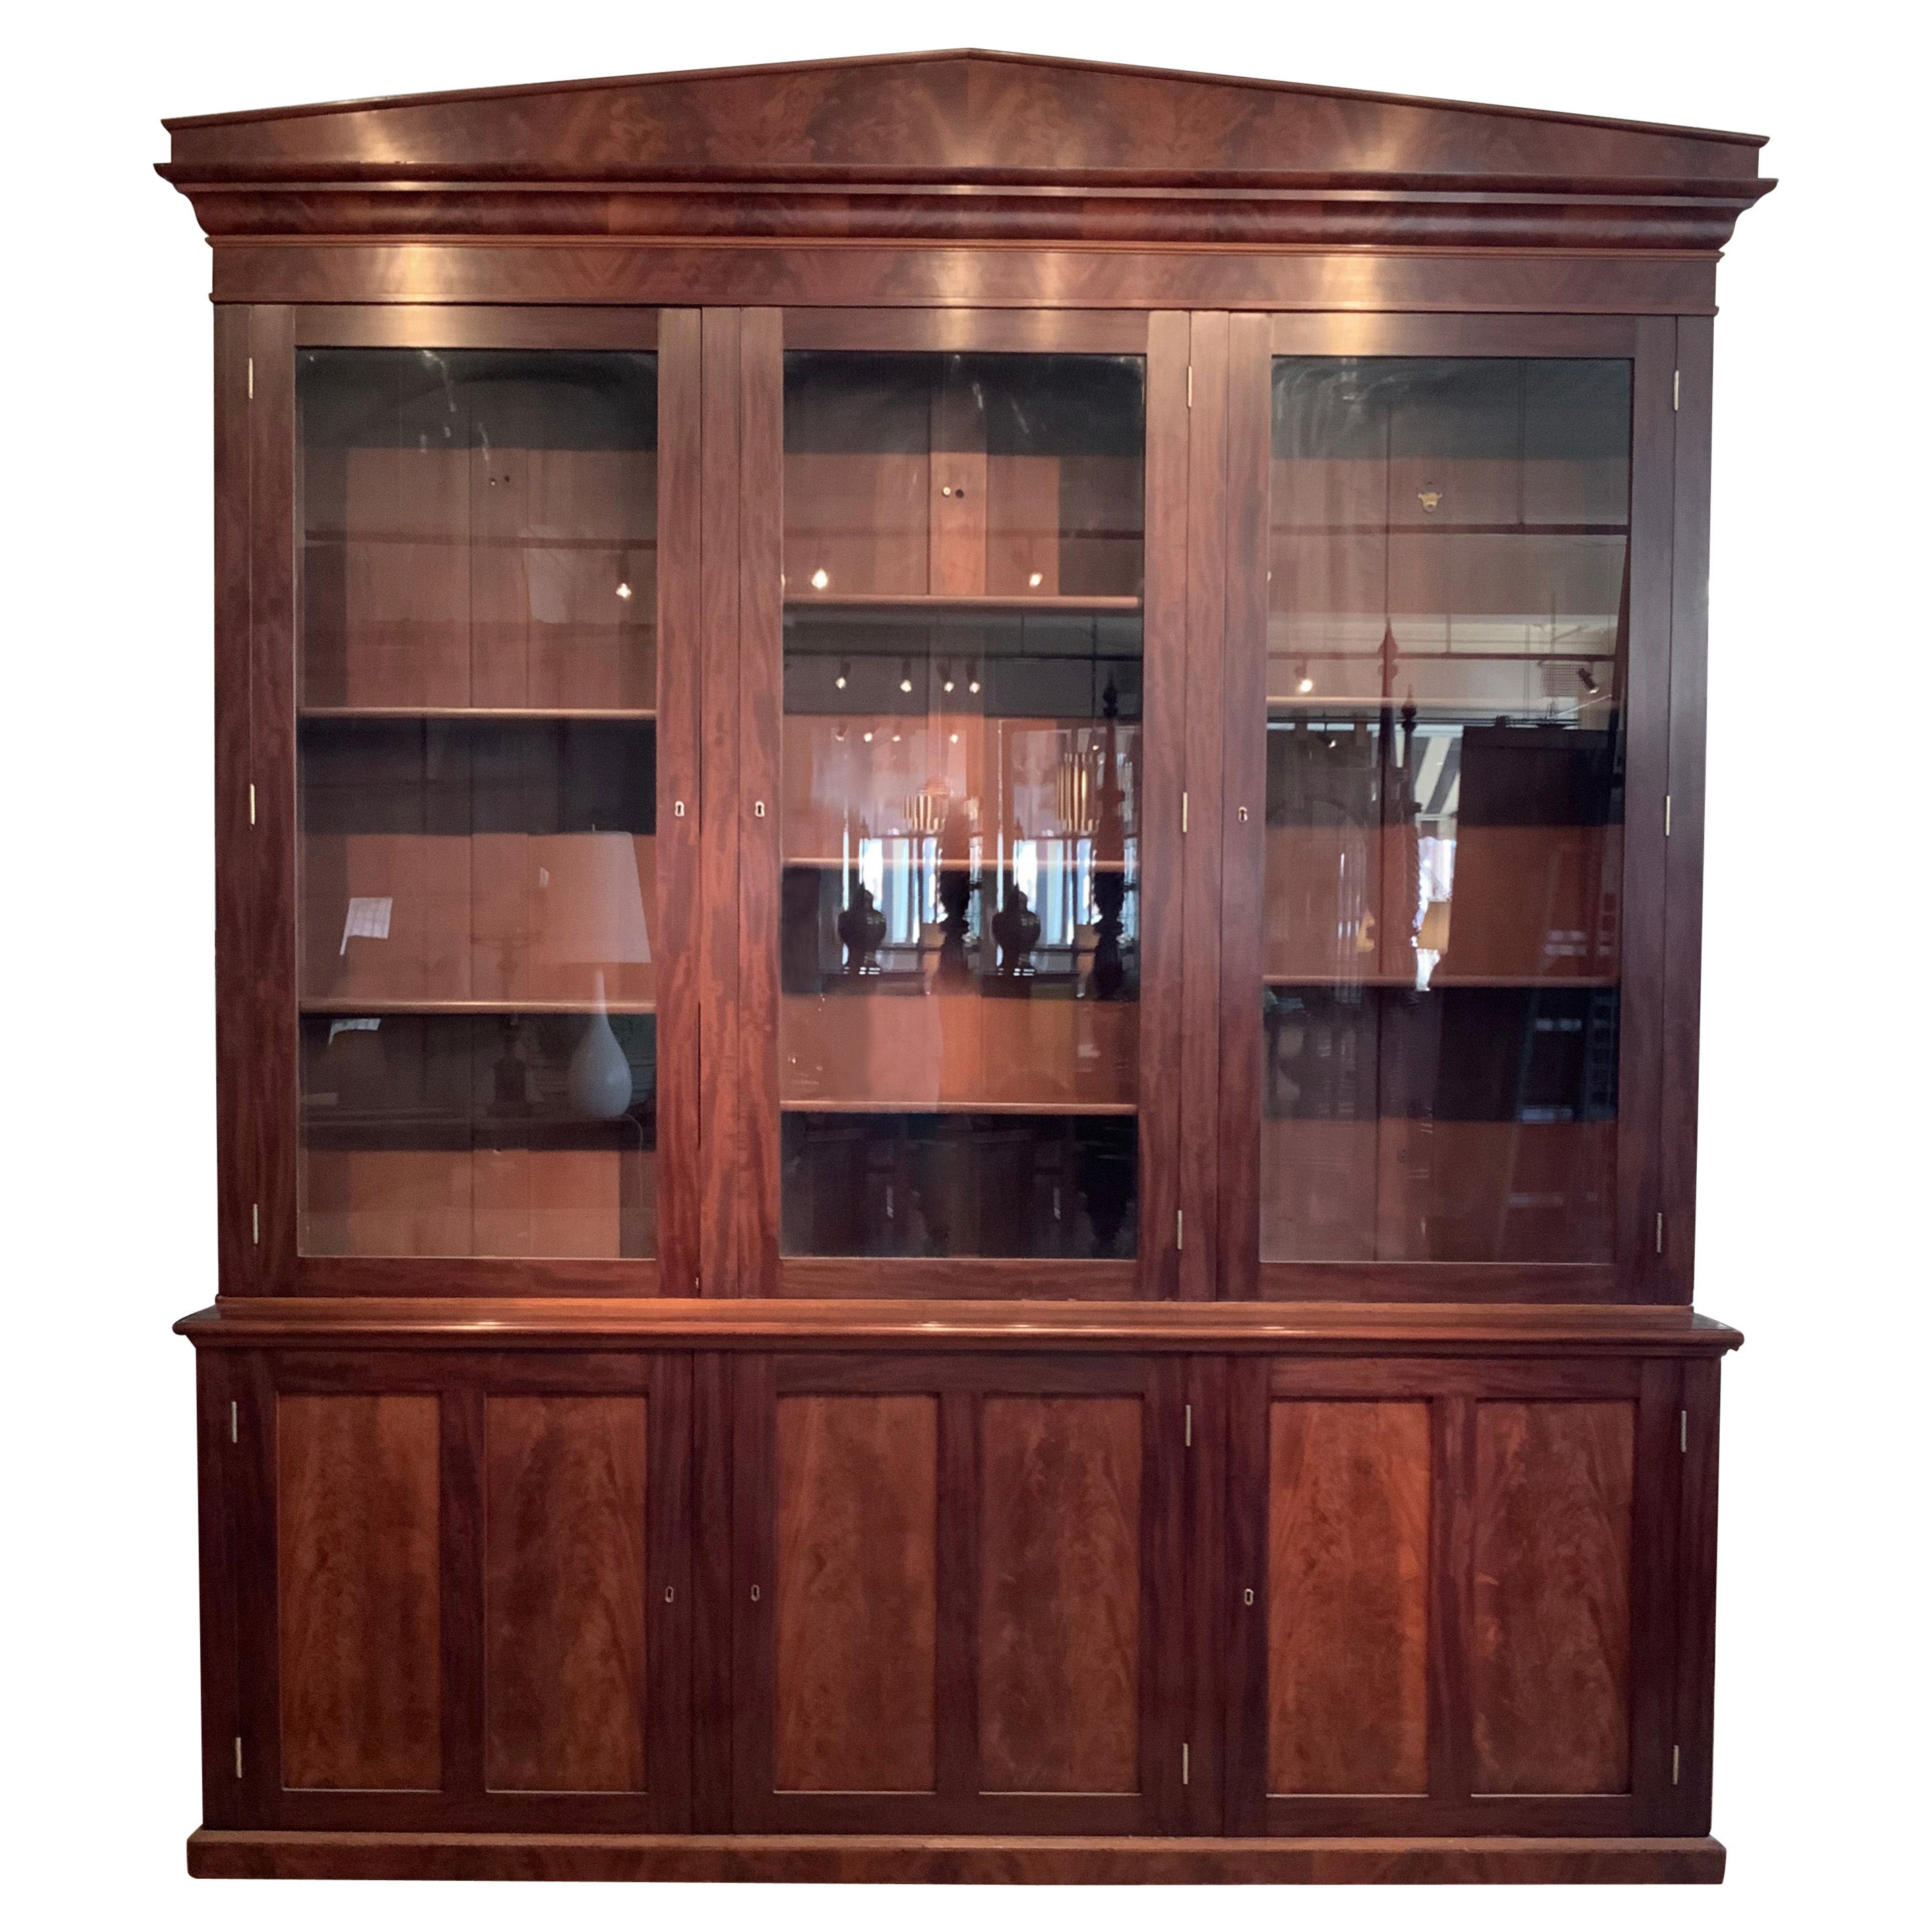 19th Century Classical Bookcase Cabinet from a Harvard Library